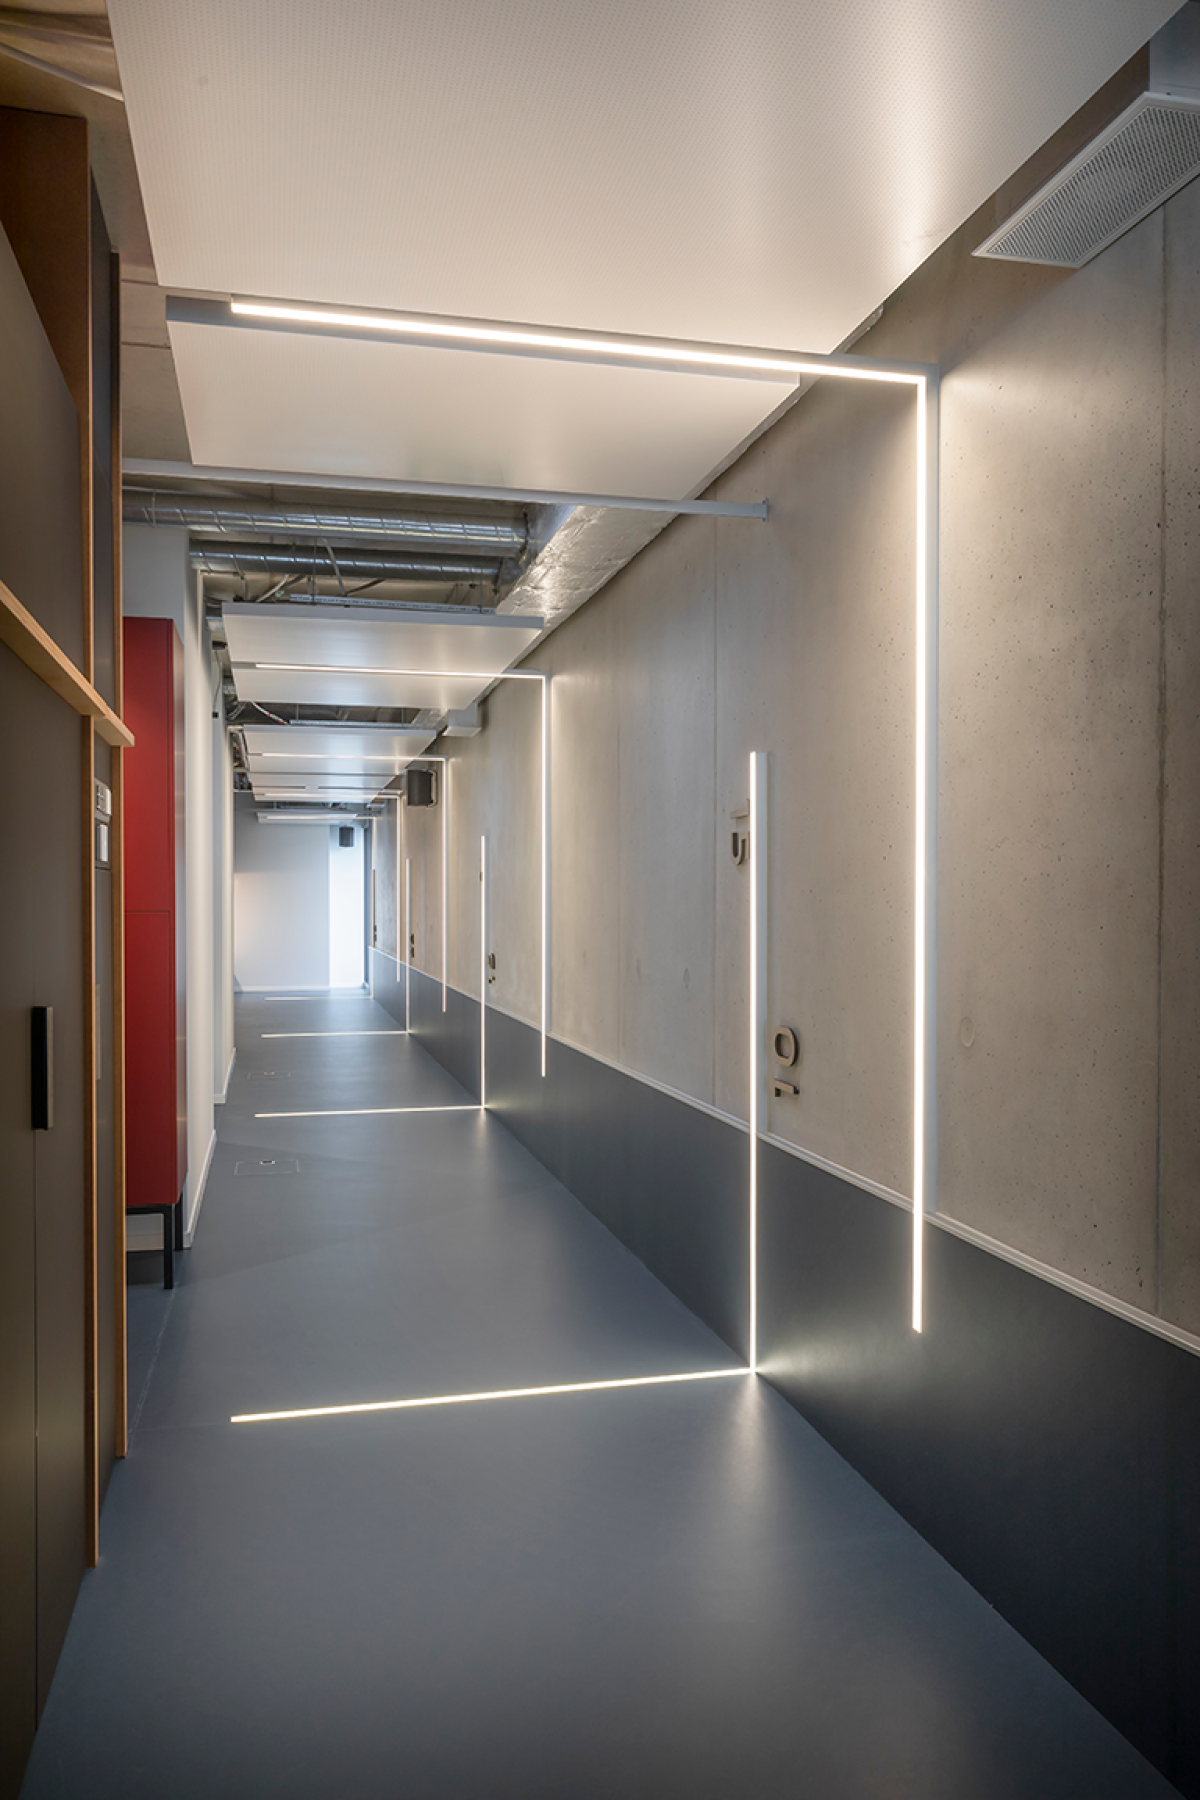 Wall-mounted linear profiles for lighting a corridor in a physiotherapy practice